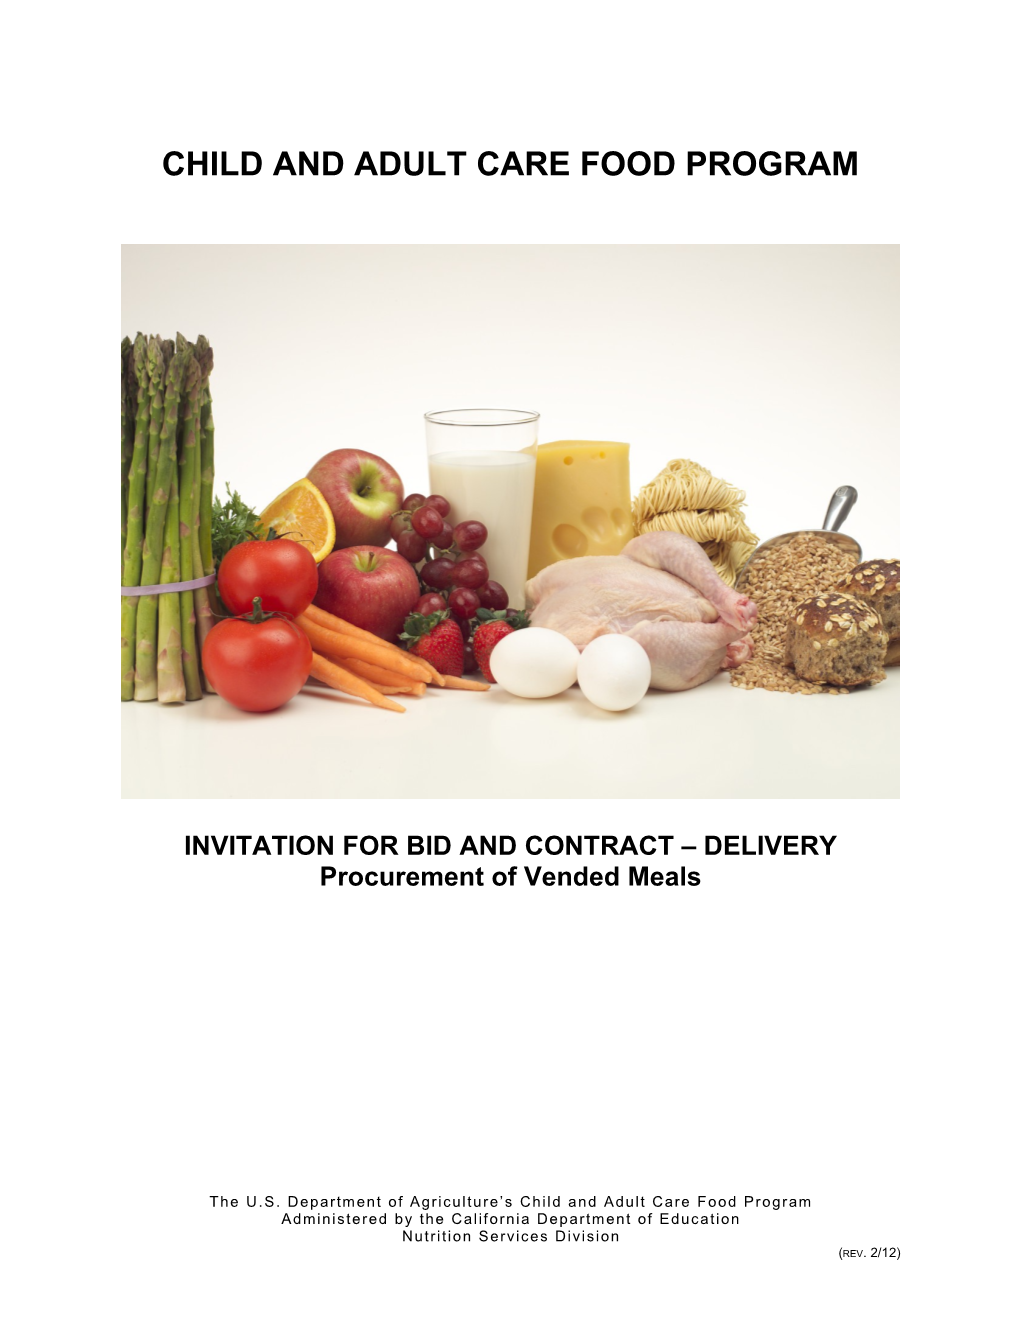 2004-05 Child Care Bid Package - Delivery